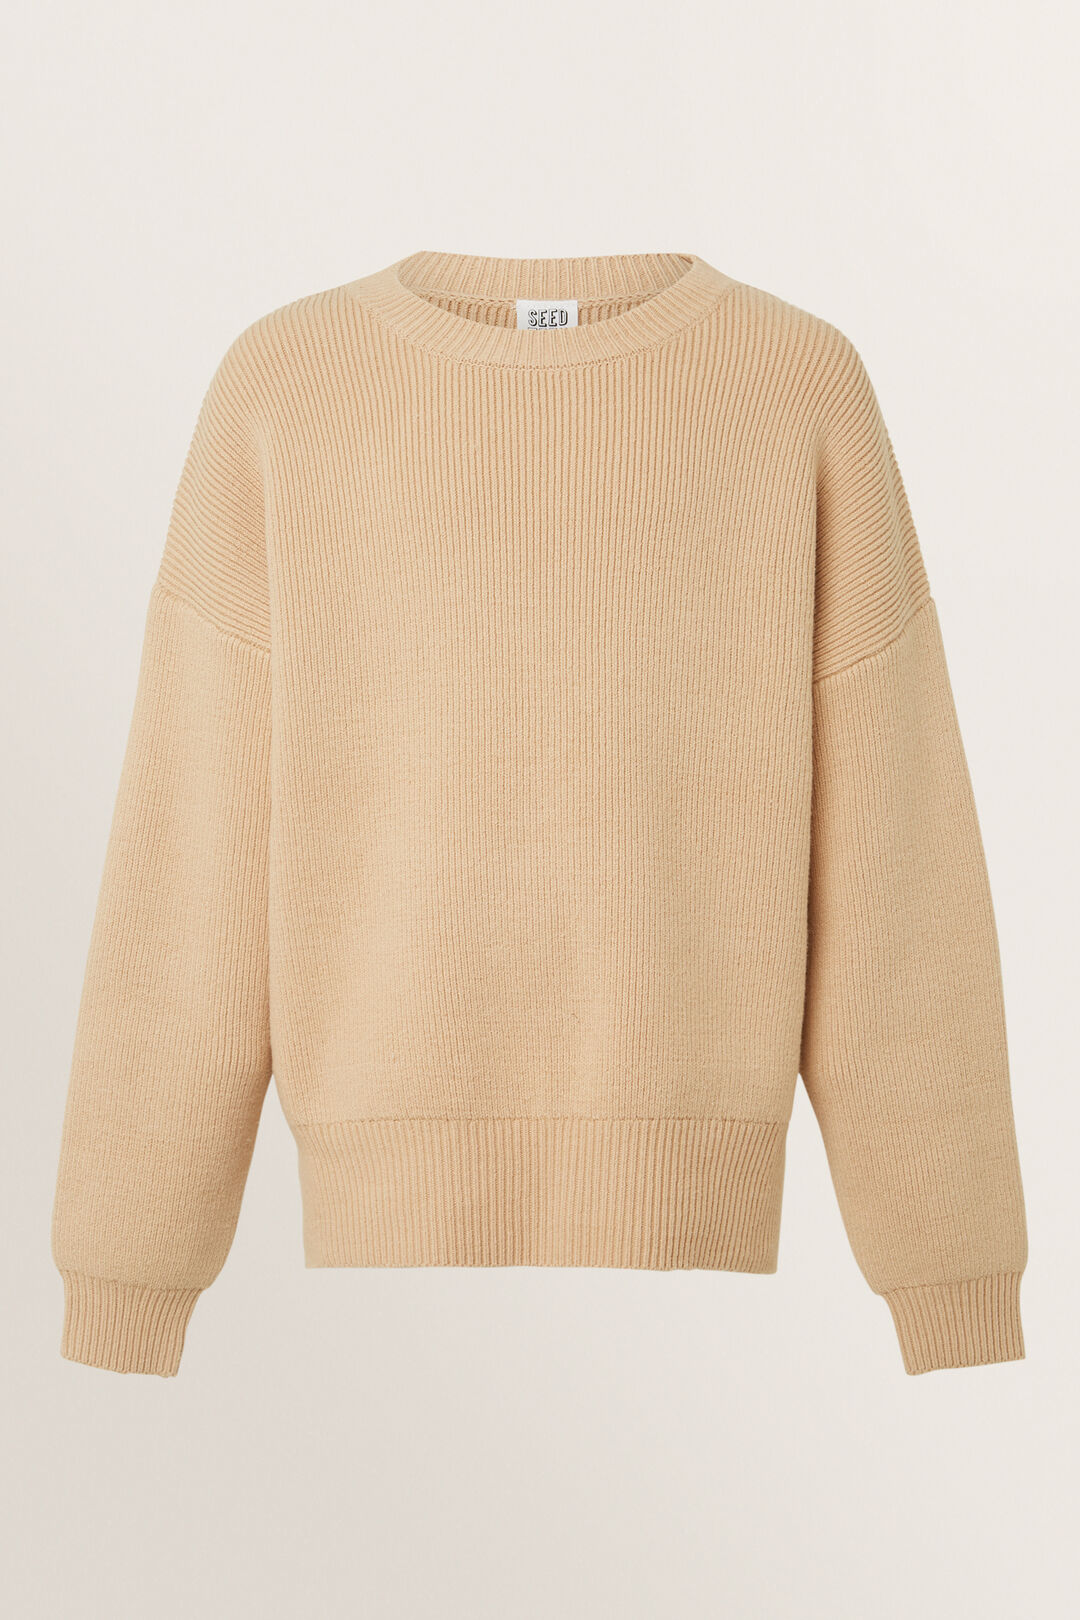 Slouchy Knit  Cappuccino  hi-res